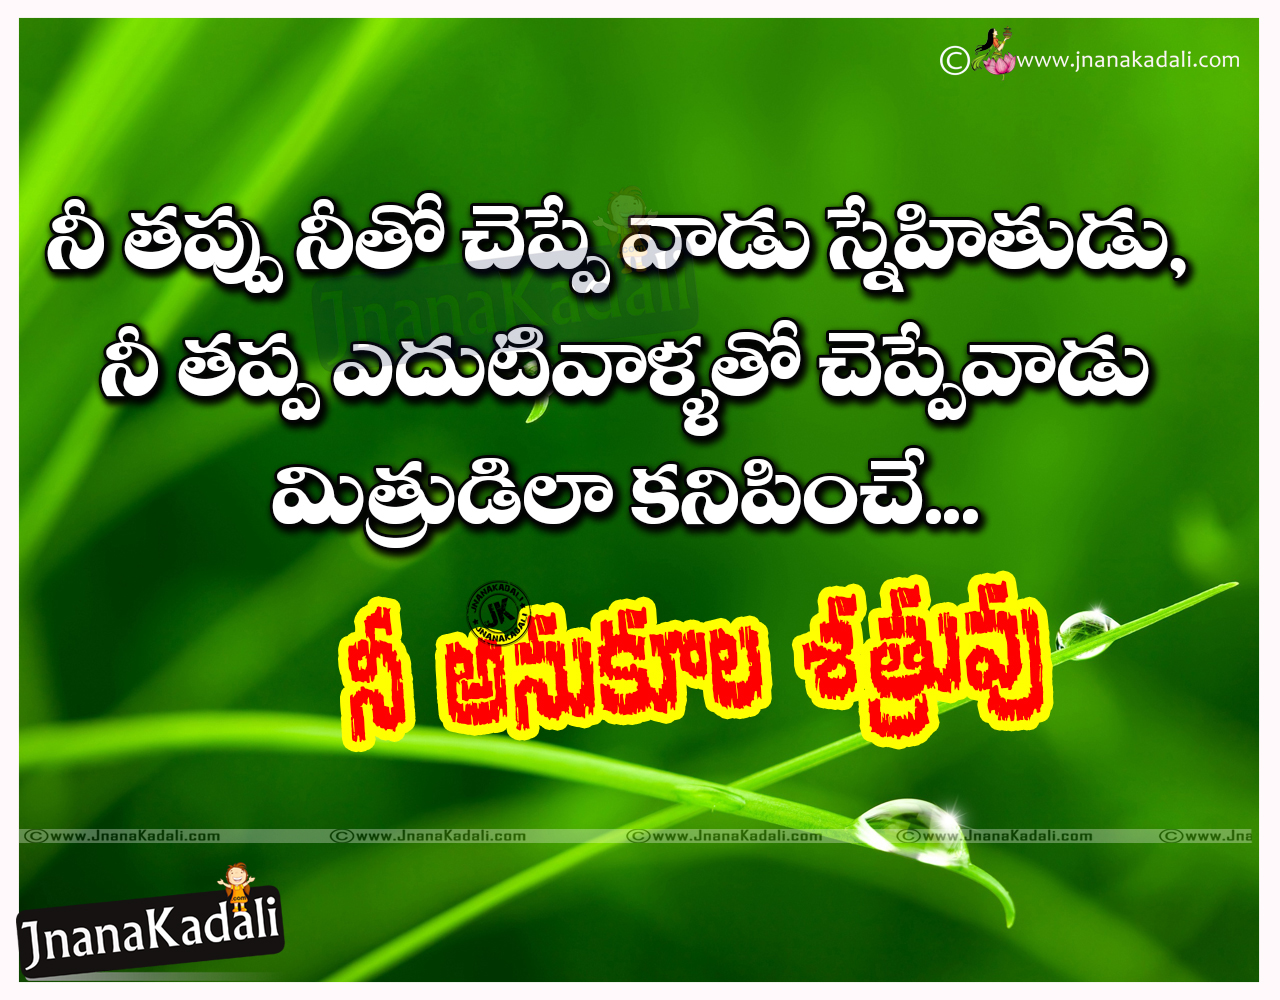 Telugu Heart Touching Quotations About Friendship With HD